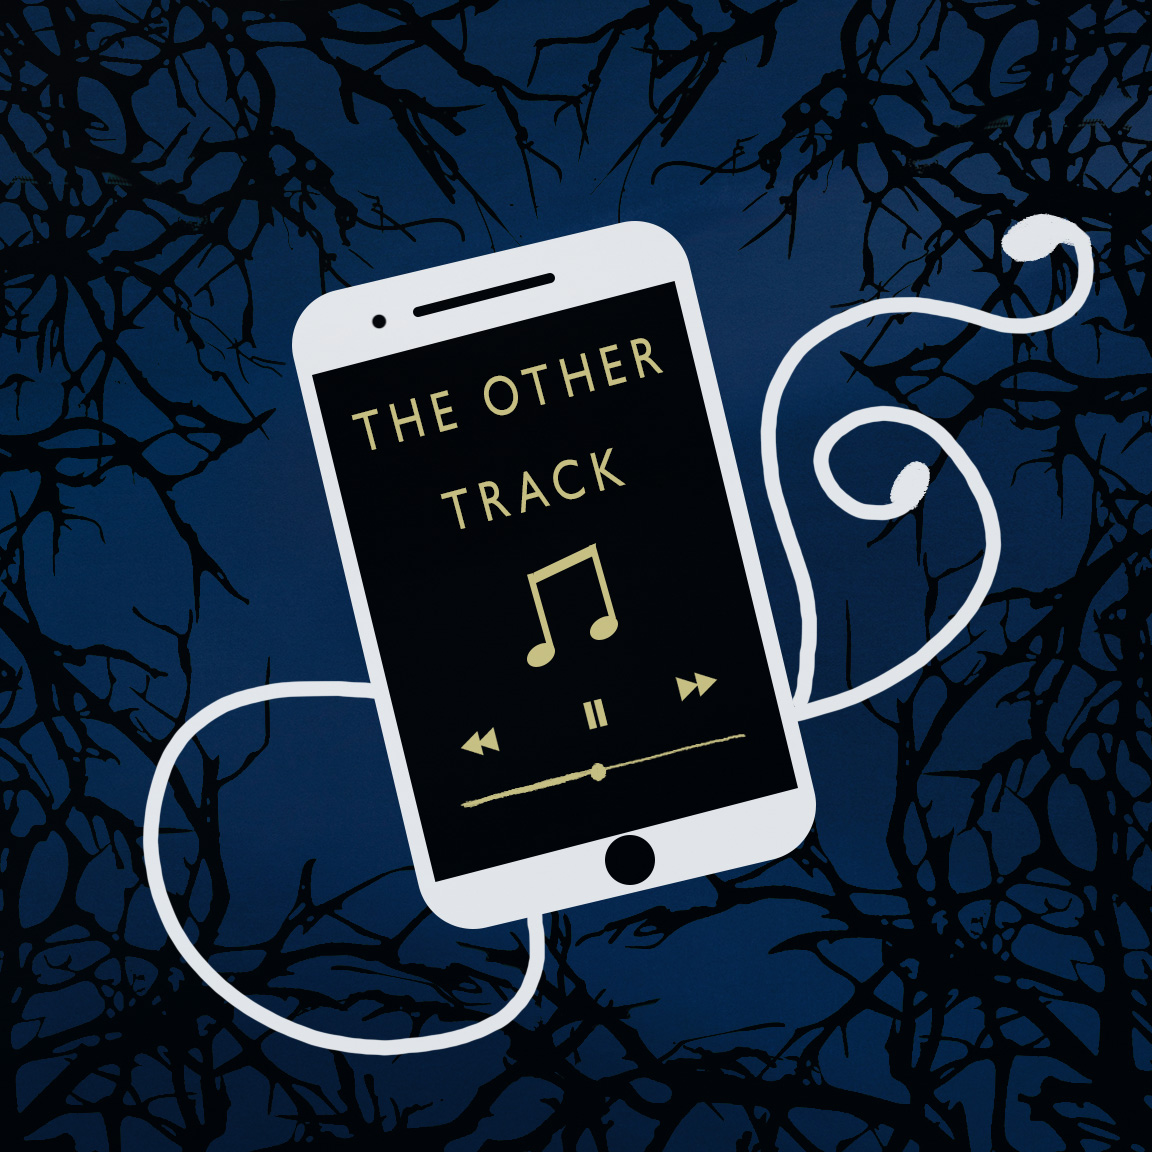 ✨THE OTHER TRACK✨ Listen to the “Ferryman’s Cruise Tunes” – a playlist that fuses the modern and medieval. Inspired by our newest episode, “The Feathered Ogre' by @danperetti. Listen on Spotify at open.spotify.com/playlist/7ePed… #italian #playlist #folklore